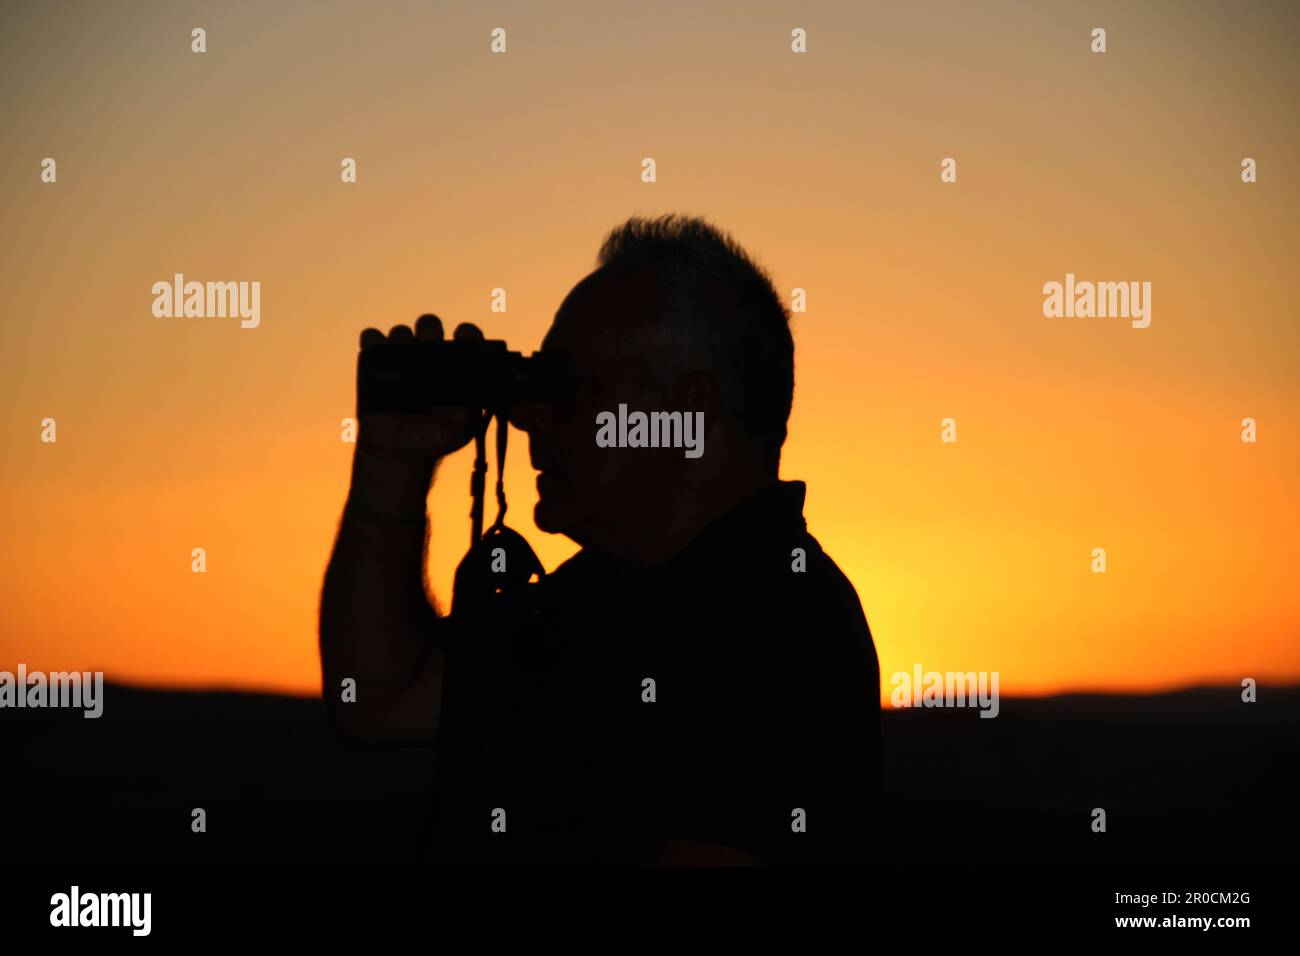 Silhouette of a profile of a man looking through binoculars at sunset Stock Photo